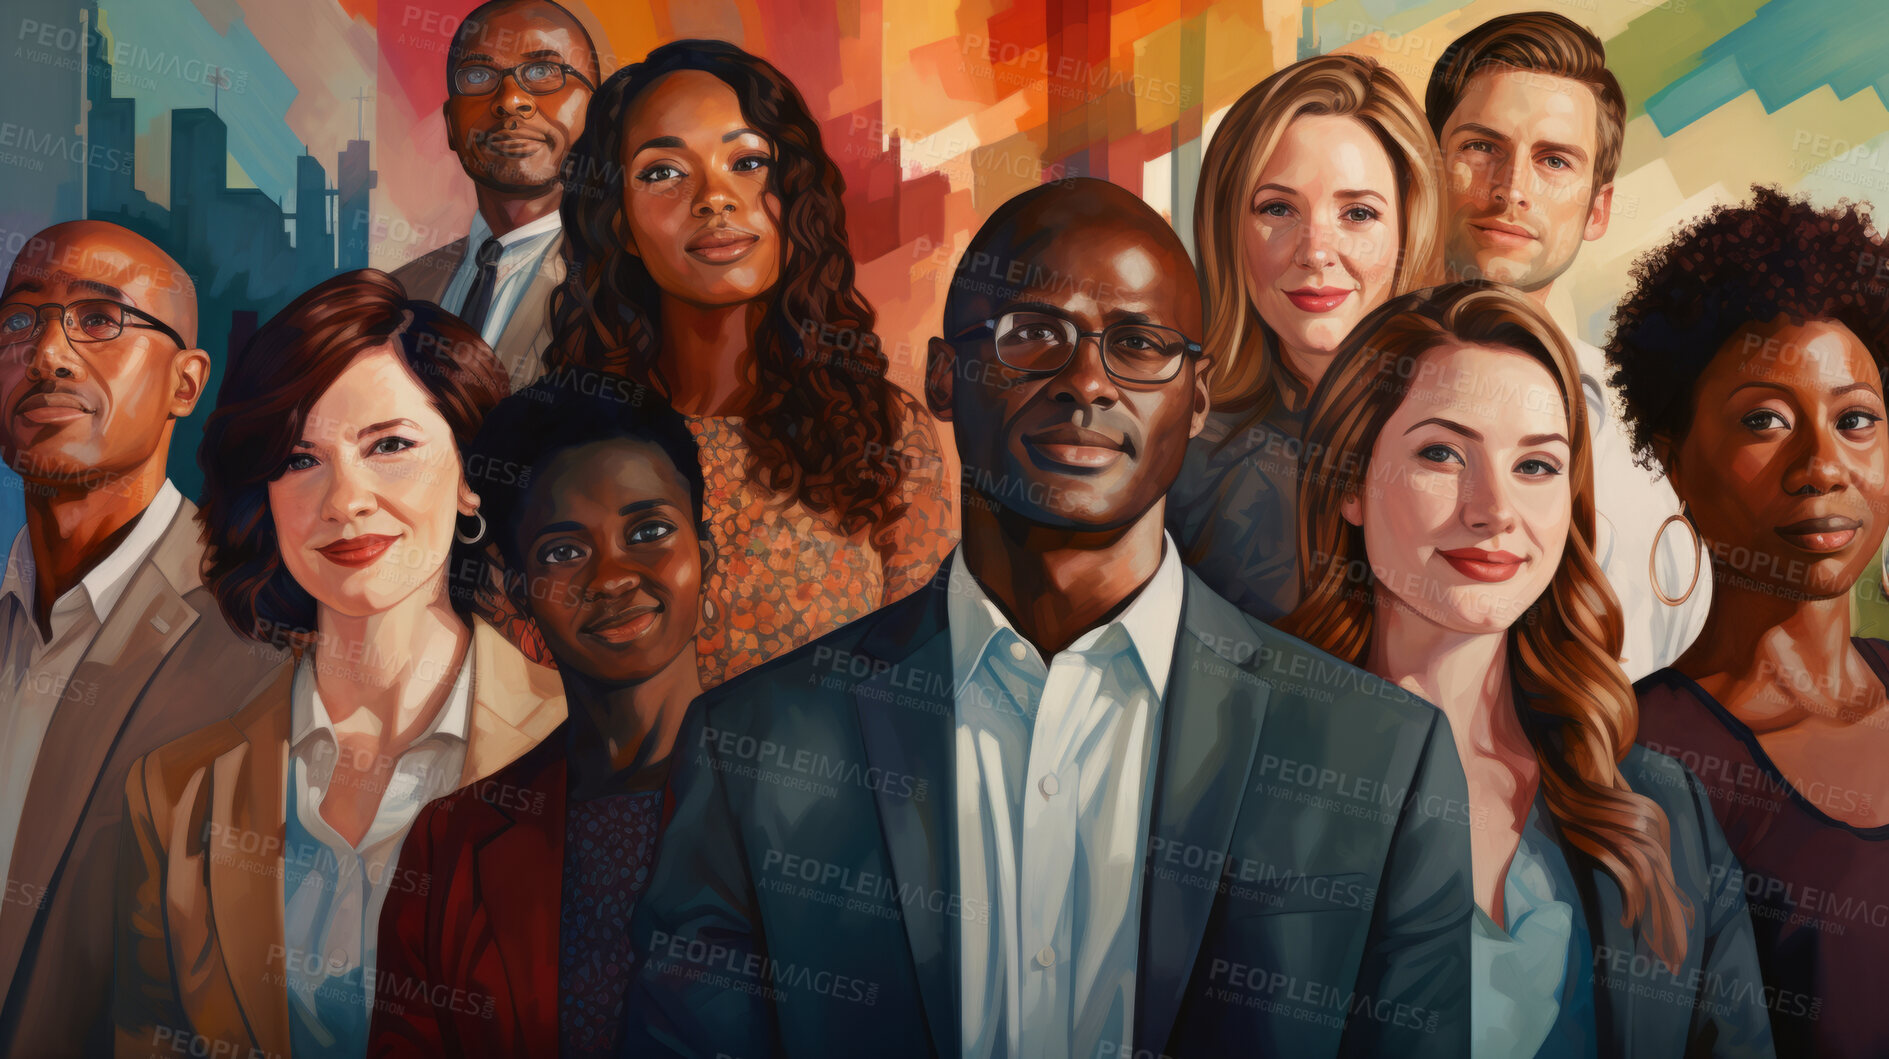 Buy stock photo Portrait Illustration of a group of business people smiling. Teamwork and colleagues